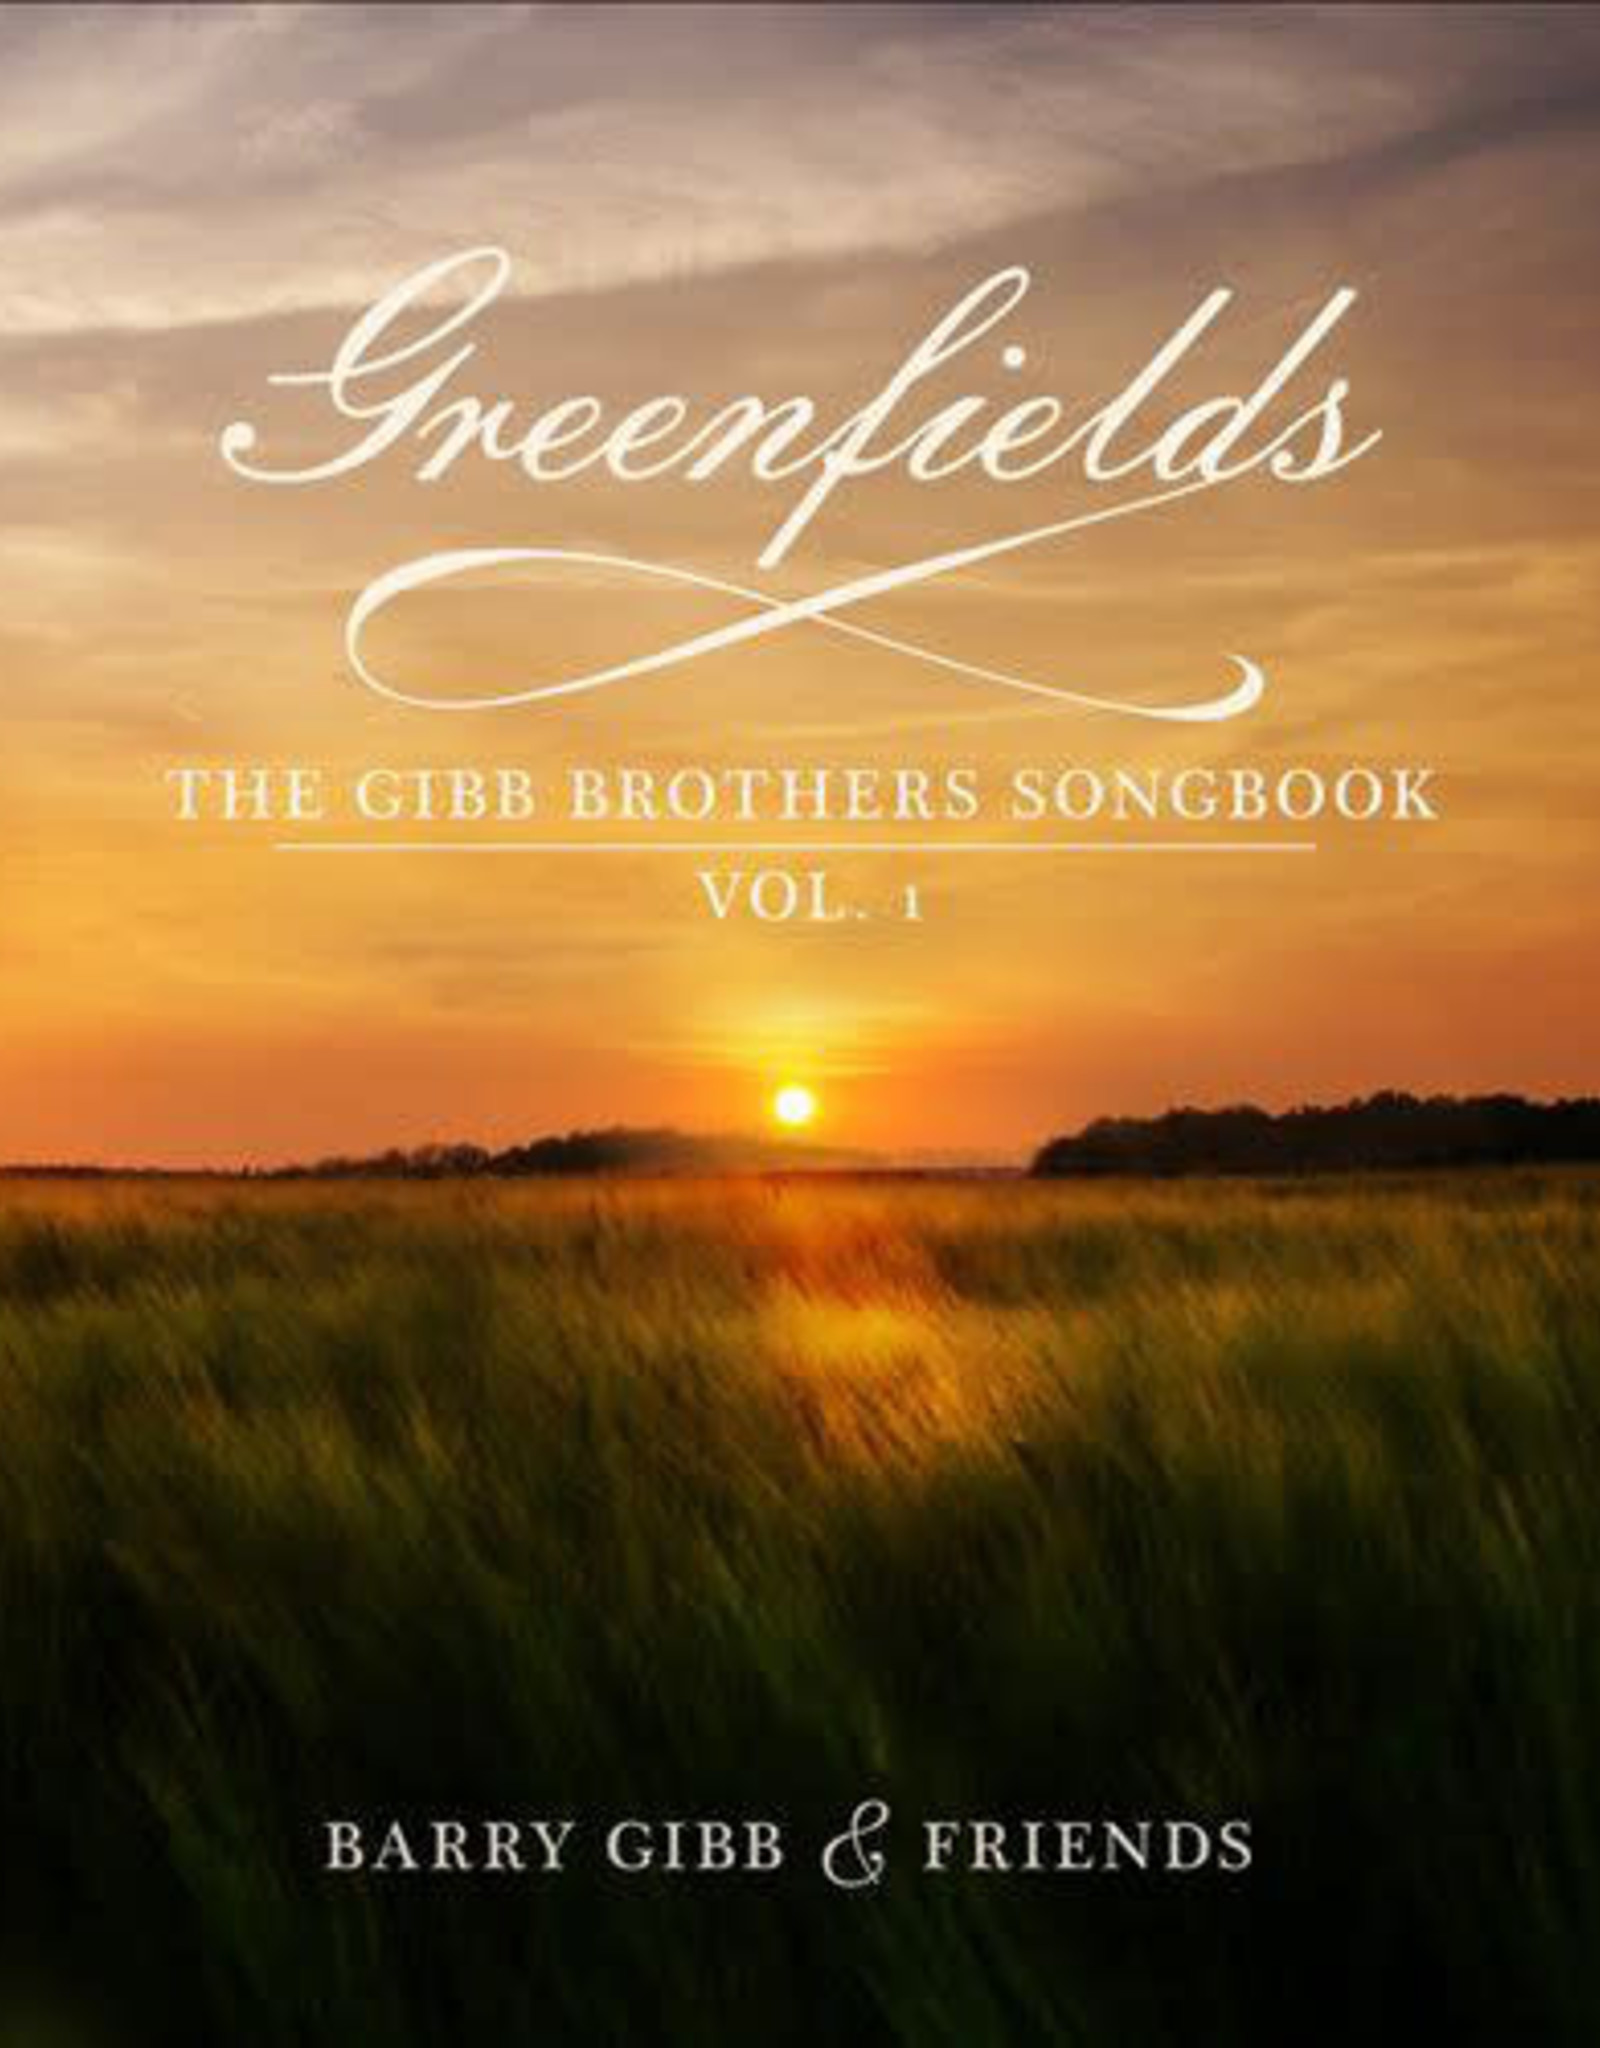 Barry Gibbs & Friends - Greenfields: The Gibb Brothers' Songbook (Vol. 1)(Silver Vinyl)